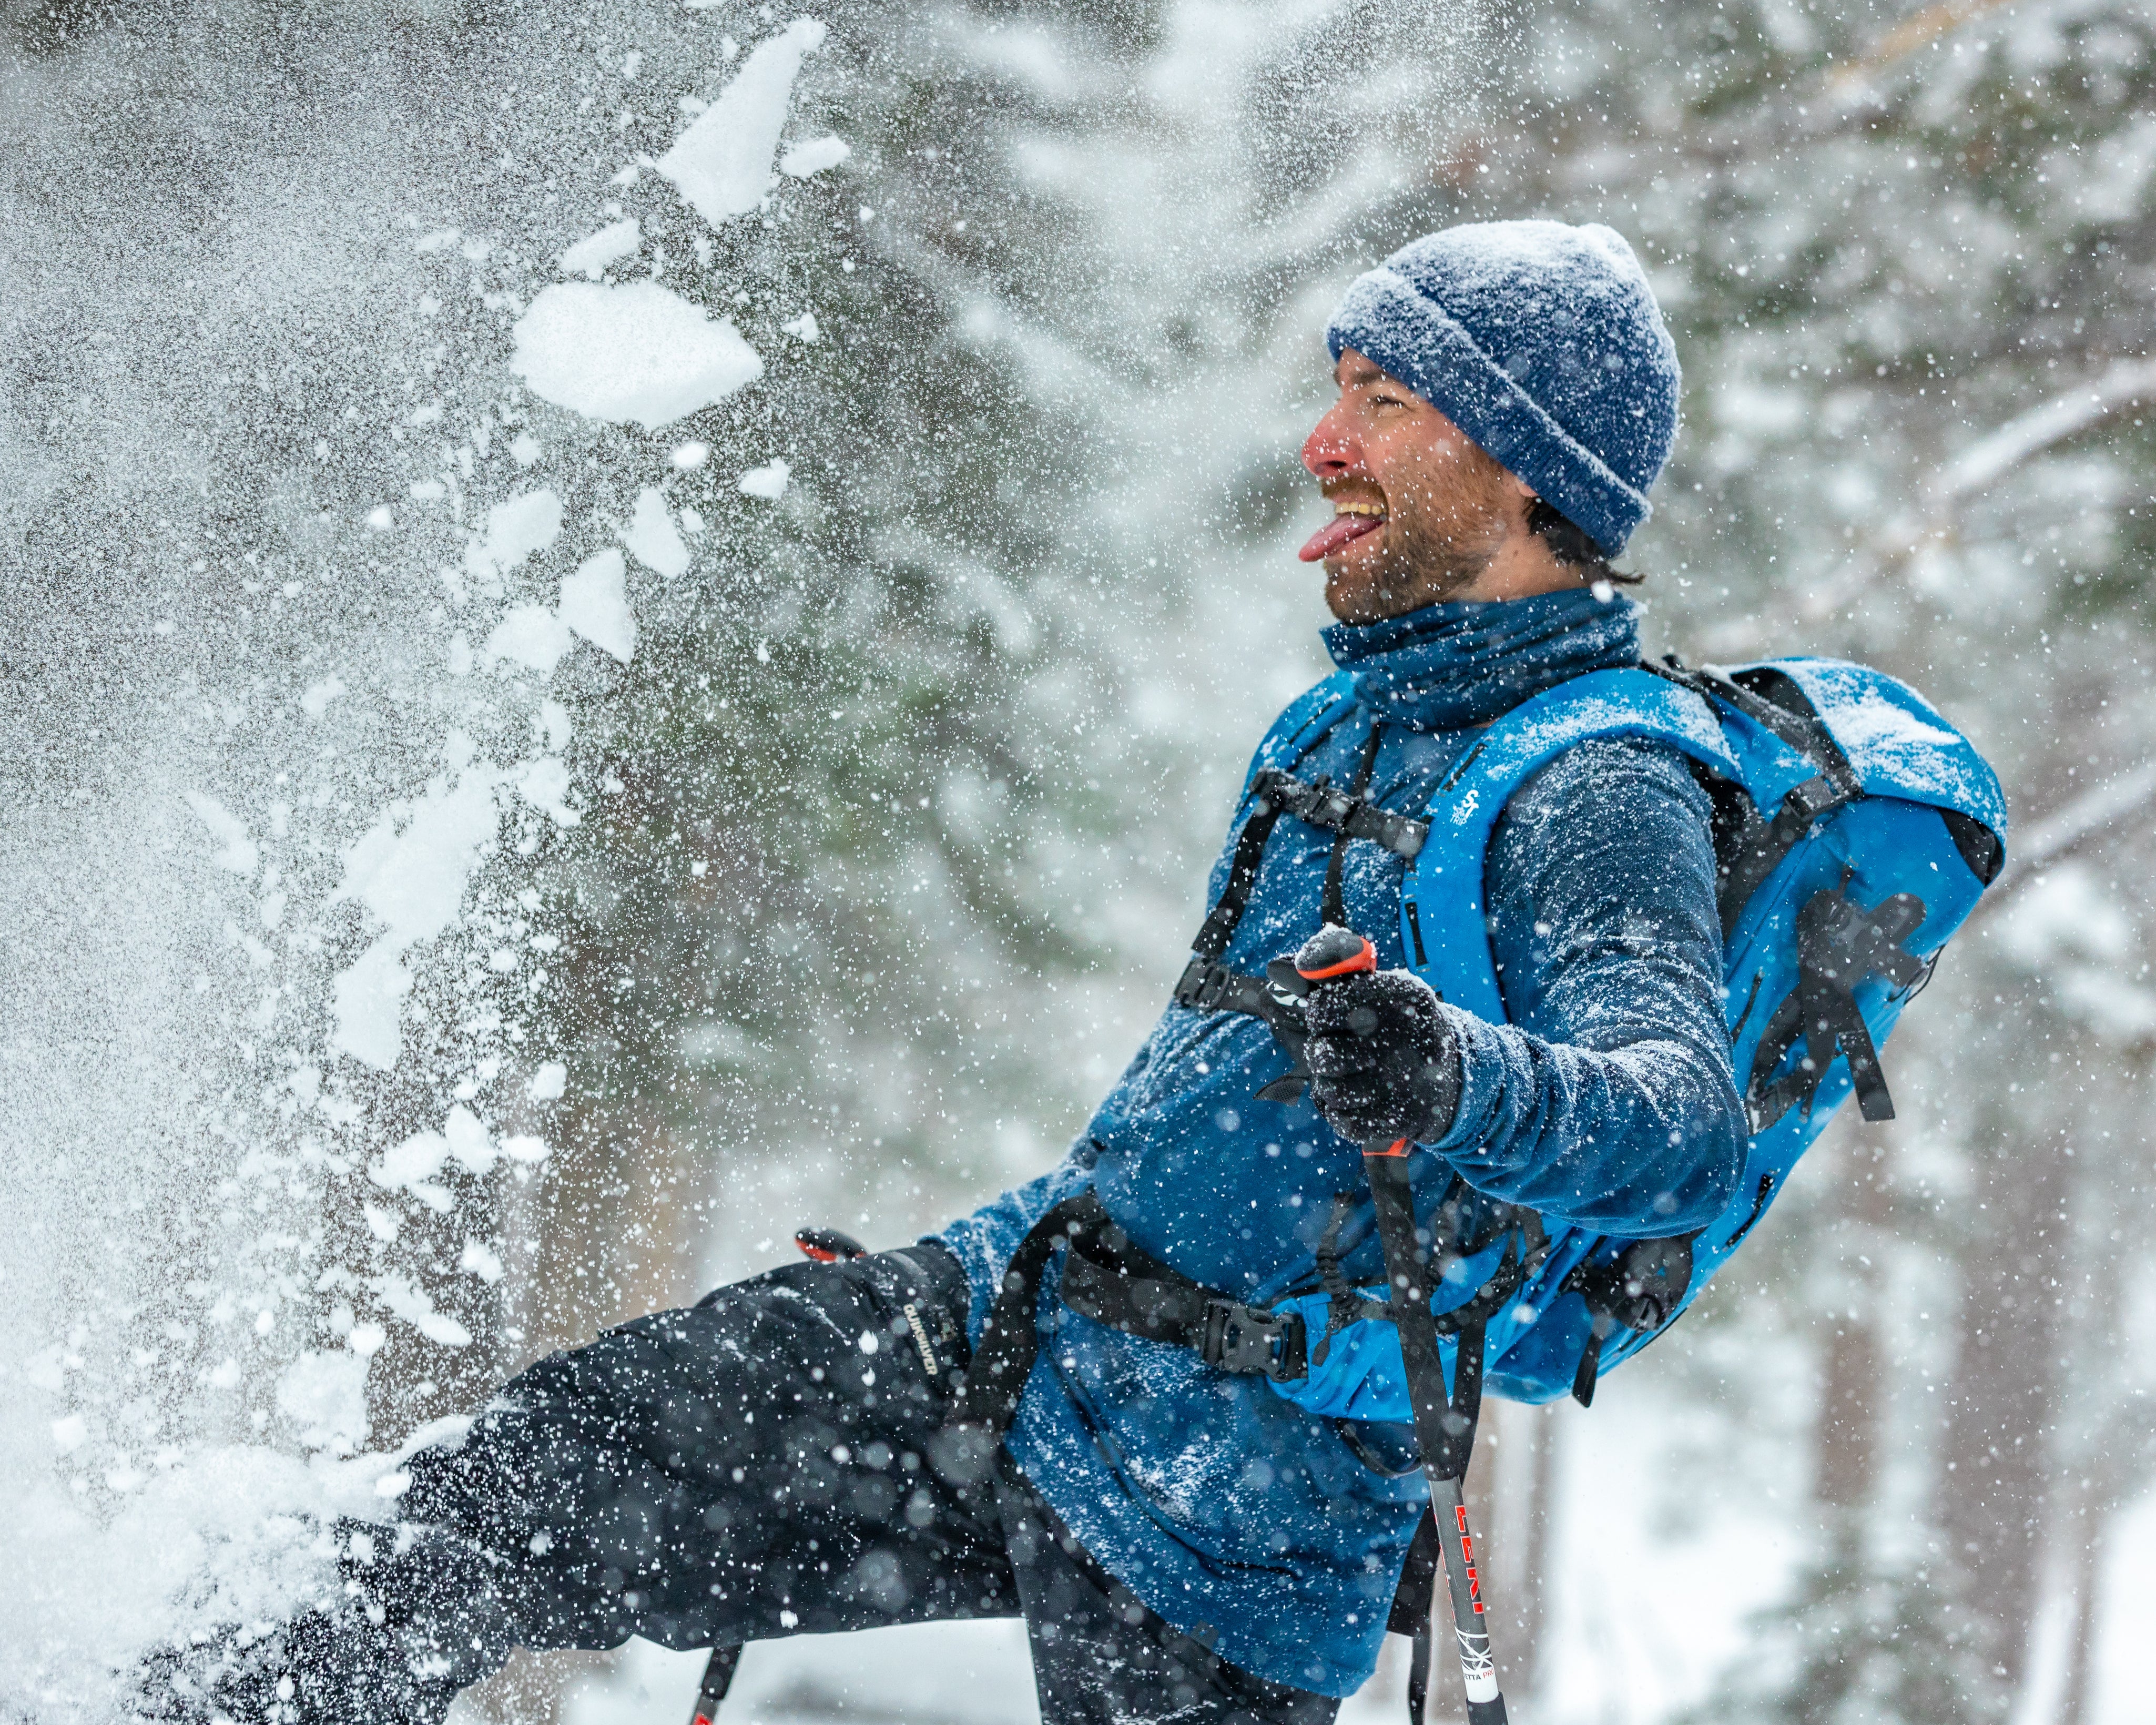 a man smiles kicking up snow while wearing blue Ridge Merino layers and a blue backpack